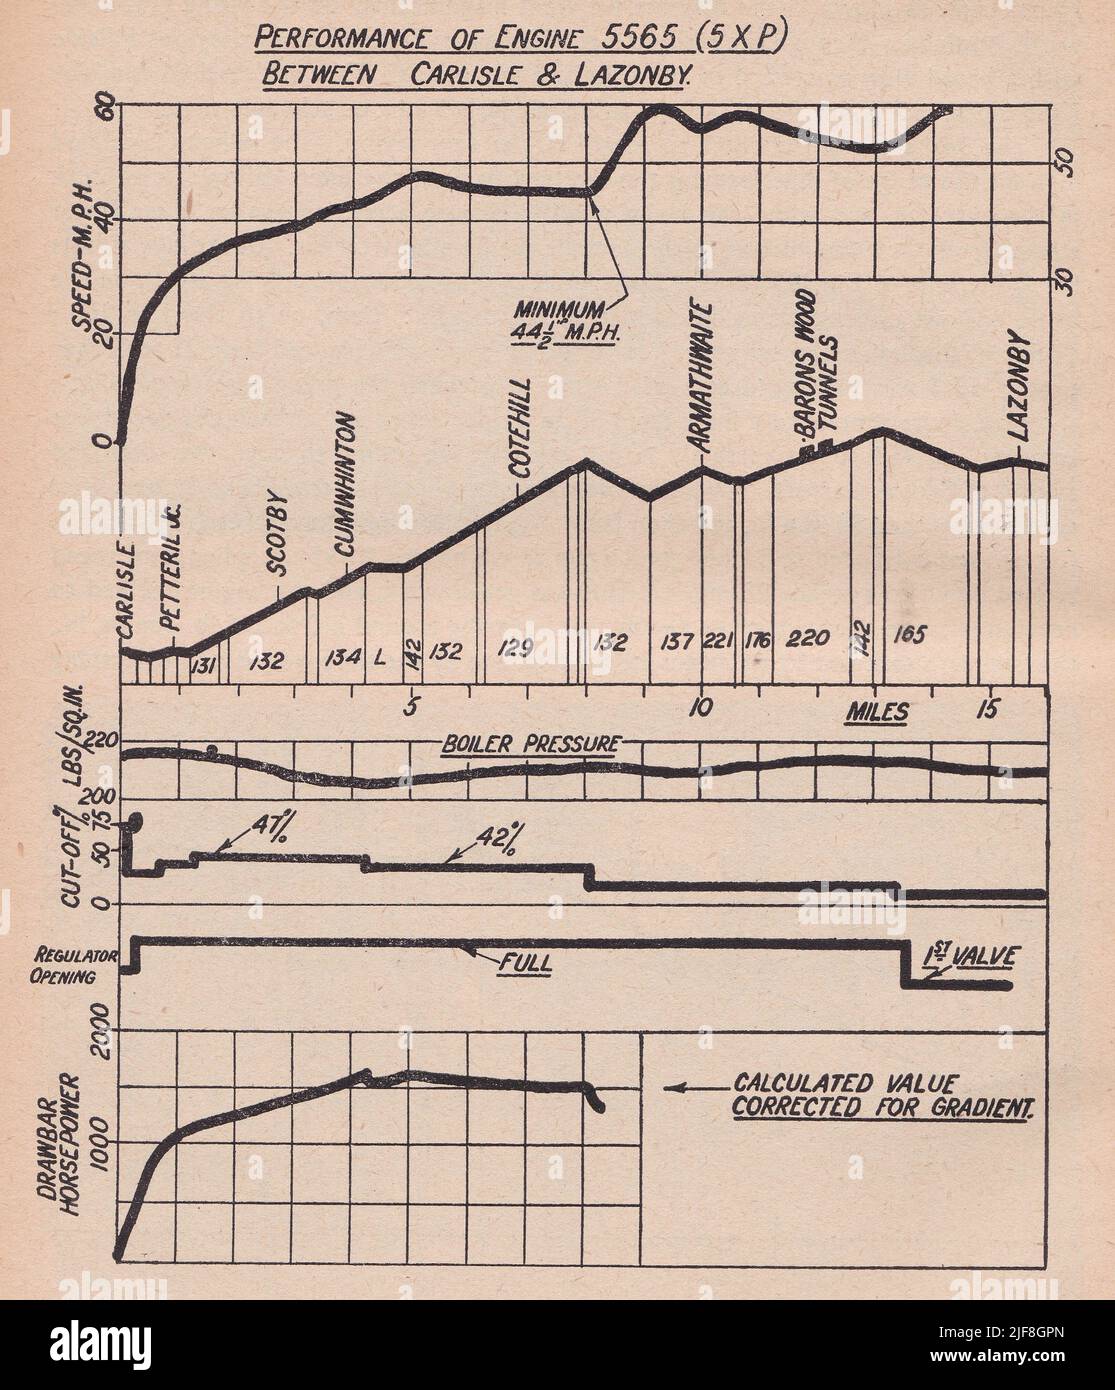 Vintage graph of Performance of Engine 5565 (5XP) Between Carlisle & Lazonby. Stock Photo